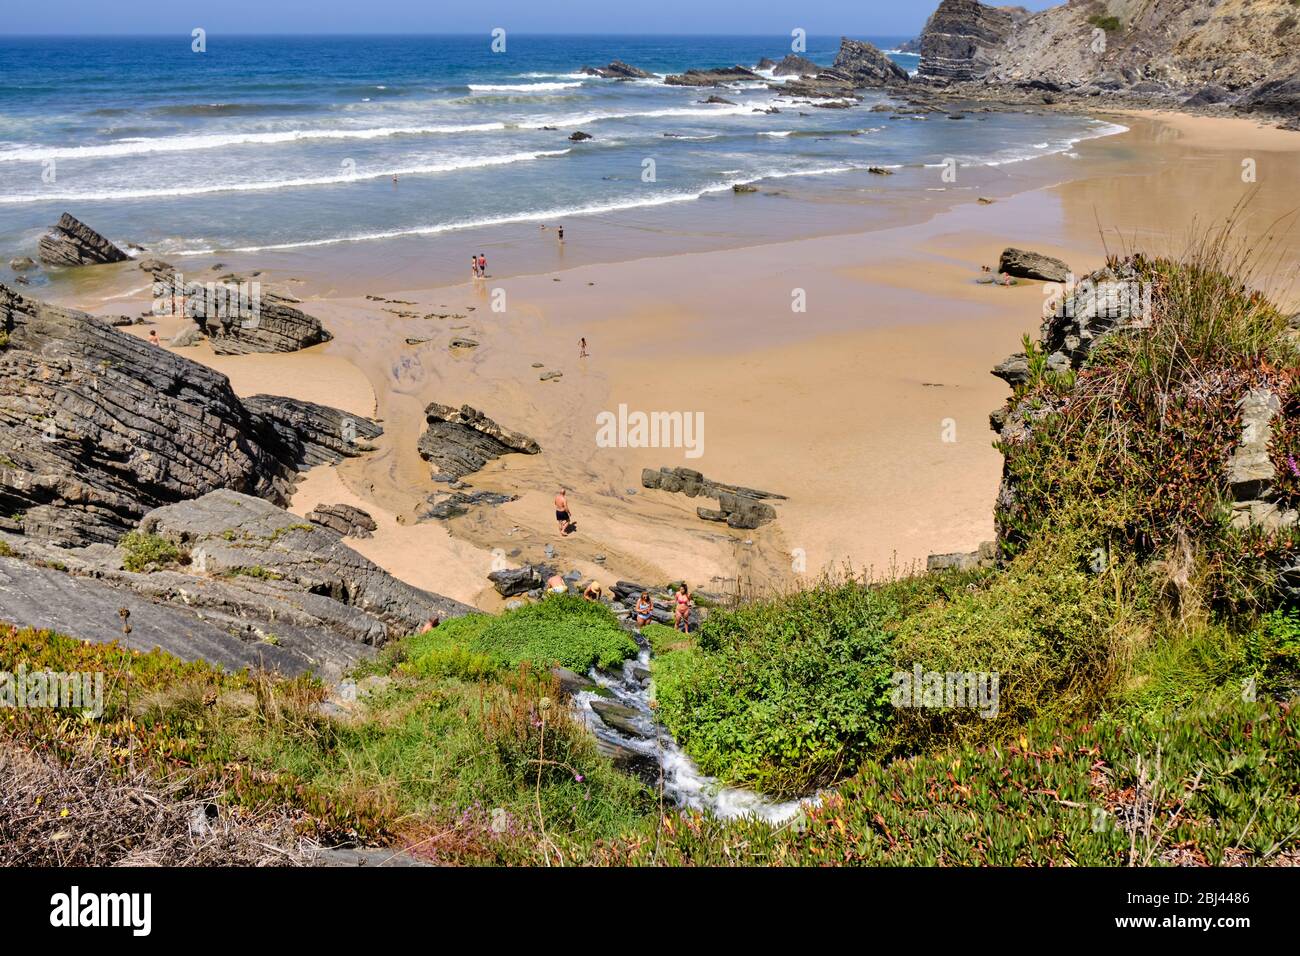 People play in the torrent that descends from the cliff at beach Praia do Carvalhal. Solo Backpacker Trekking on the Rota Vicentina and Fishermen's Tr Stock Photo